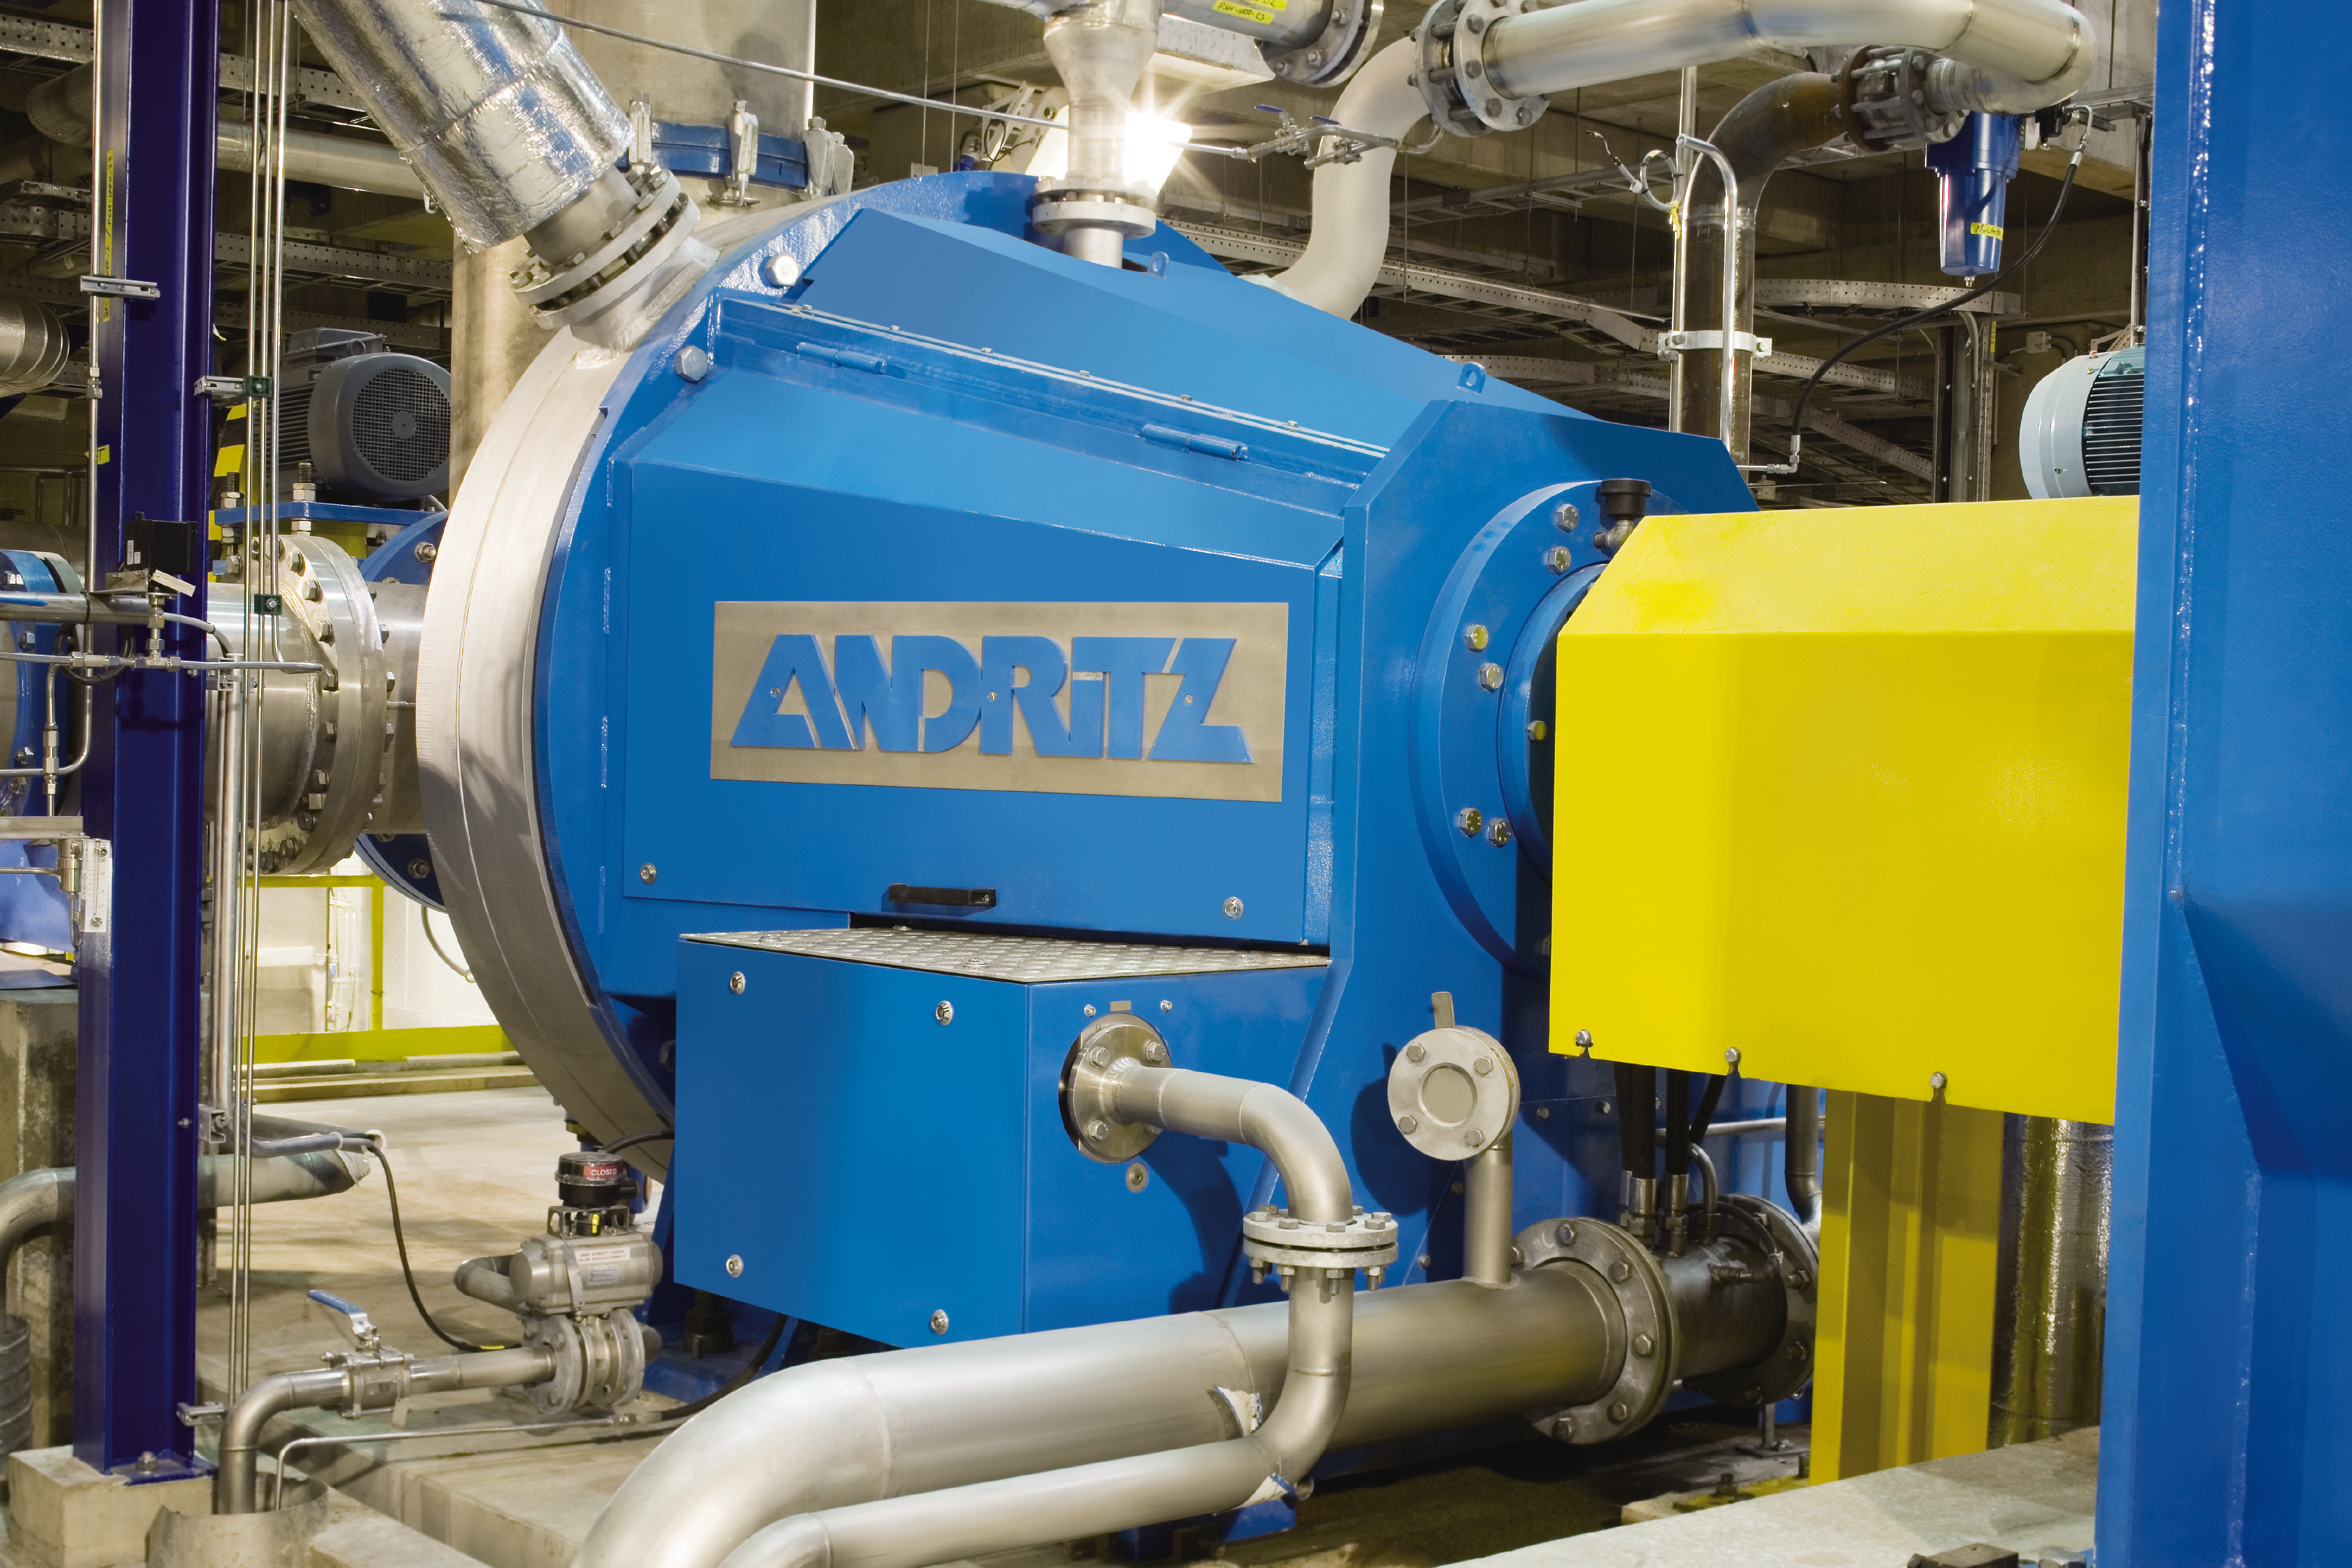 ANDRITZ to supply high-capacity P-RC APMP line to Jiangxi Five Star Paper